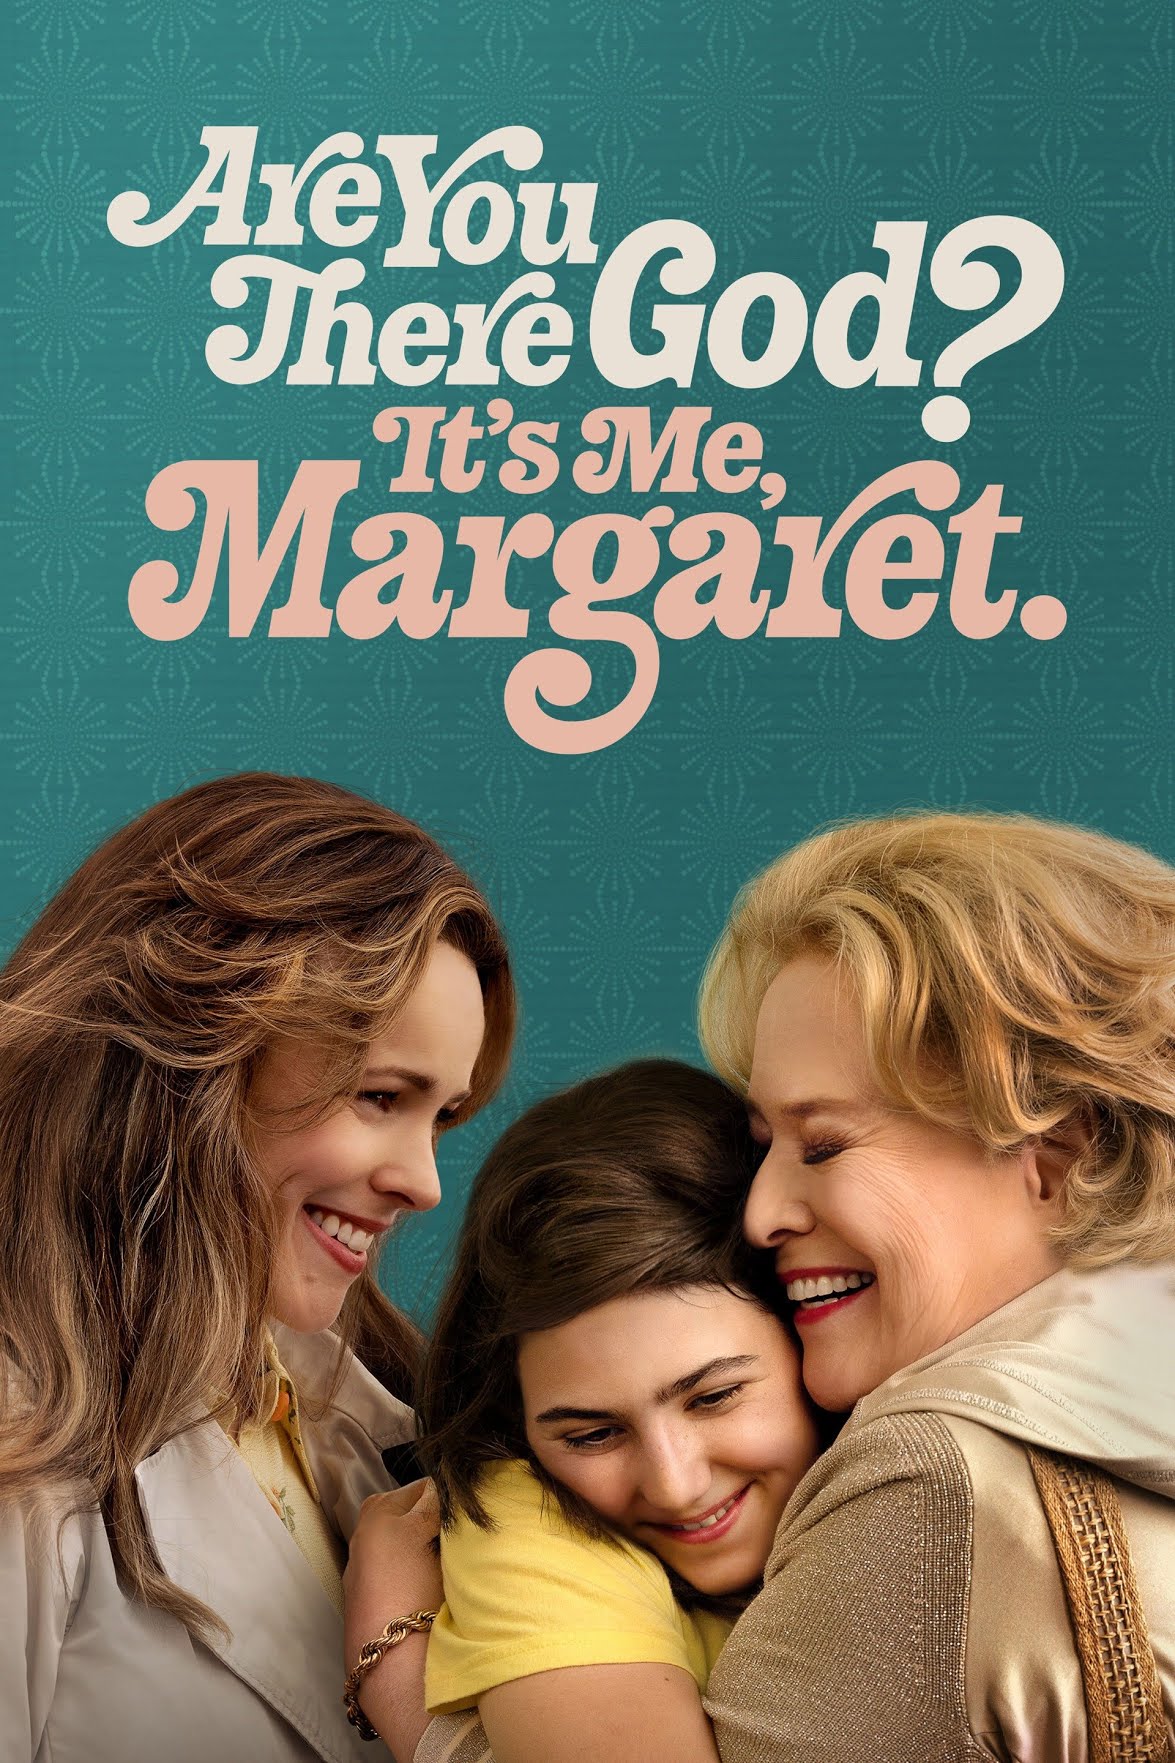 Are you there God? It's me, Margaret